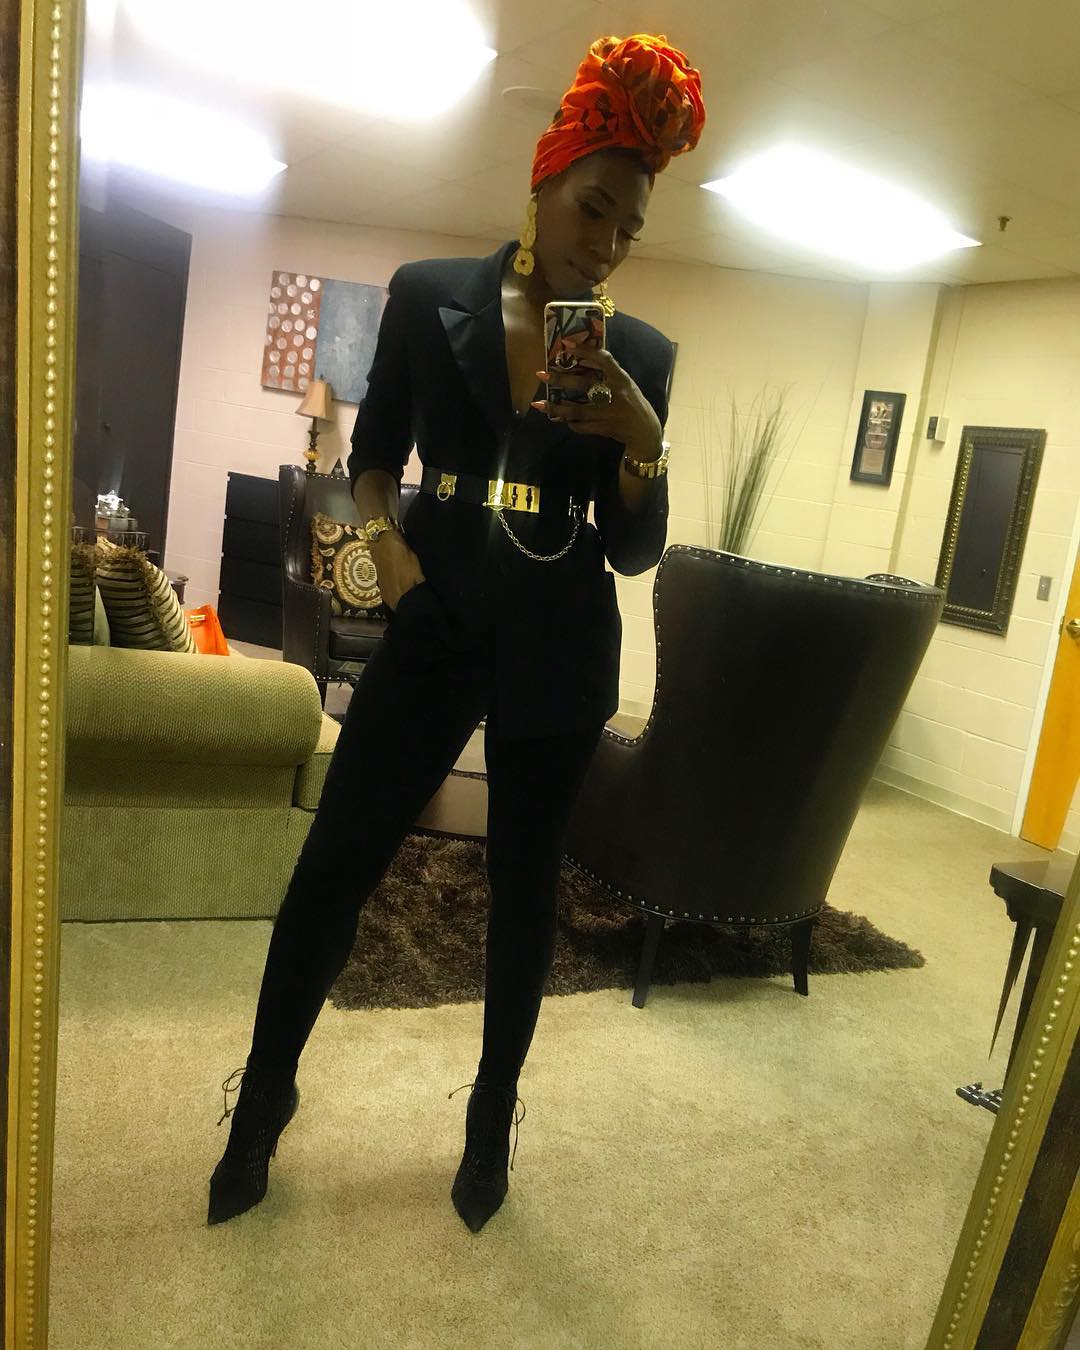 Brandi flaunting her Body physics through mirror selfie. Know more about Brandi height, net worth, wedding, husband, father, Instagram, Twitter, mother, age, siblings and many more